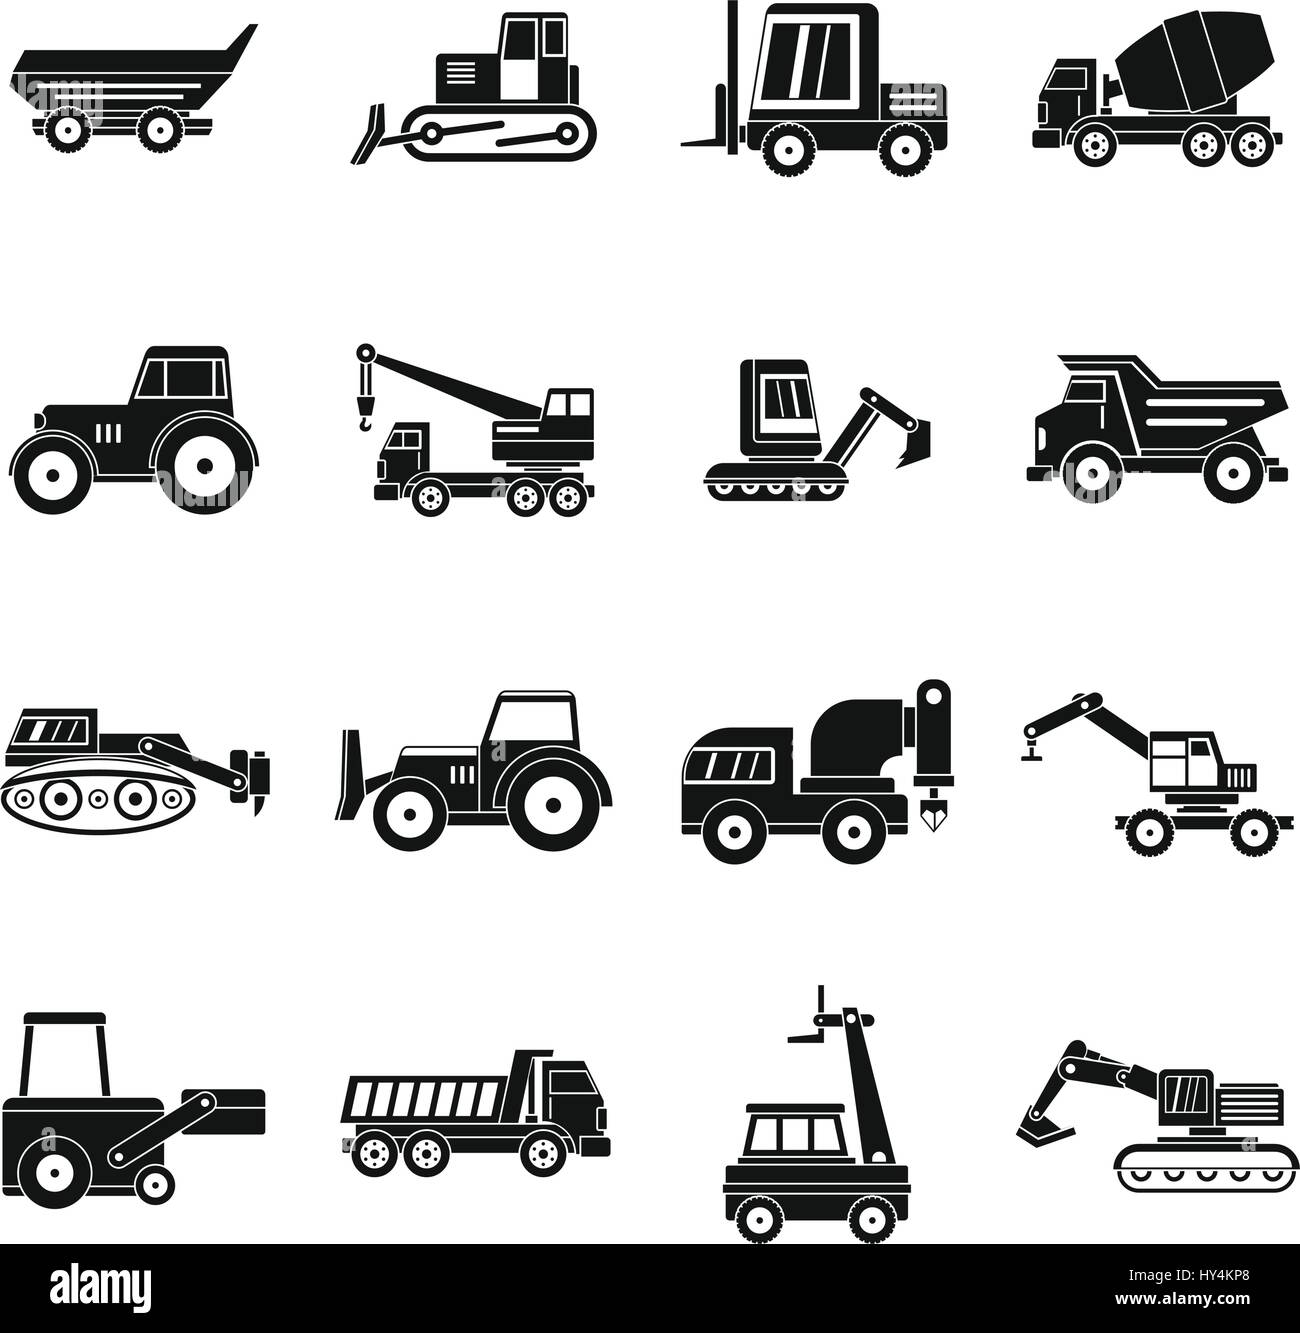 Building vehicles icons set, simple style Stock Vector